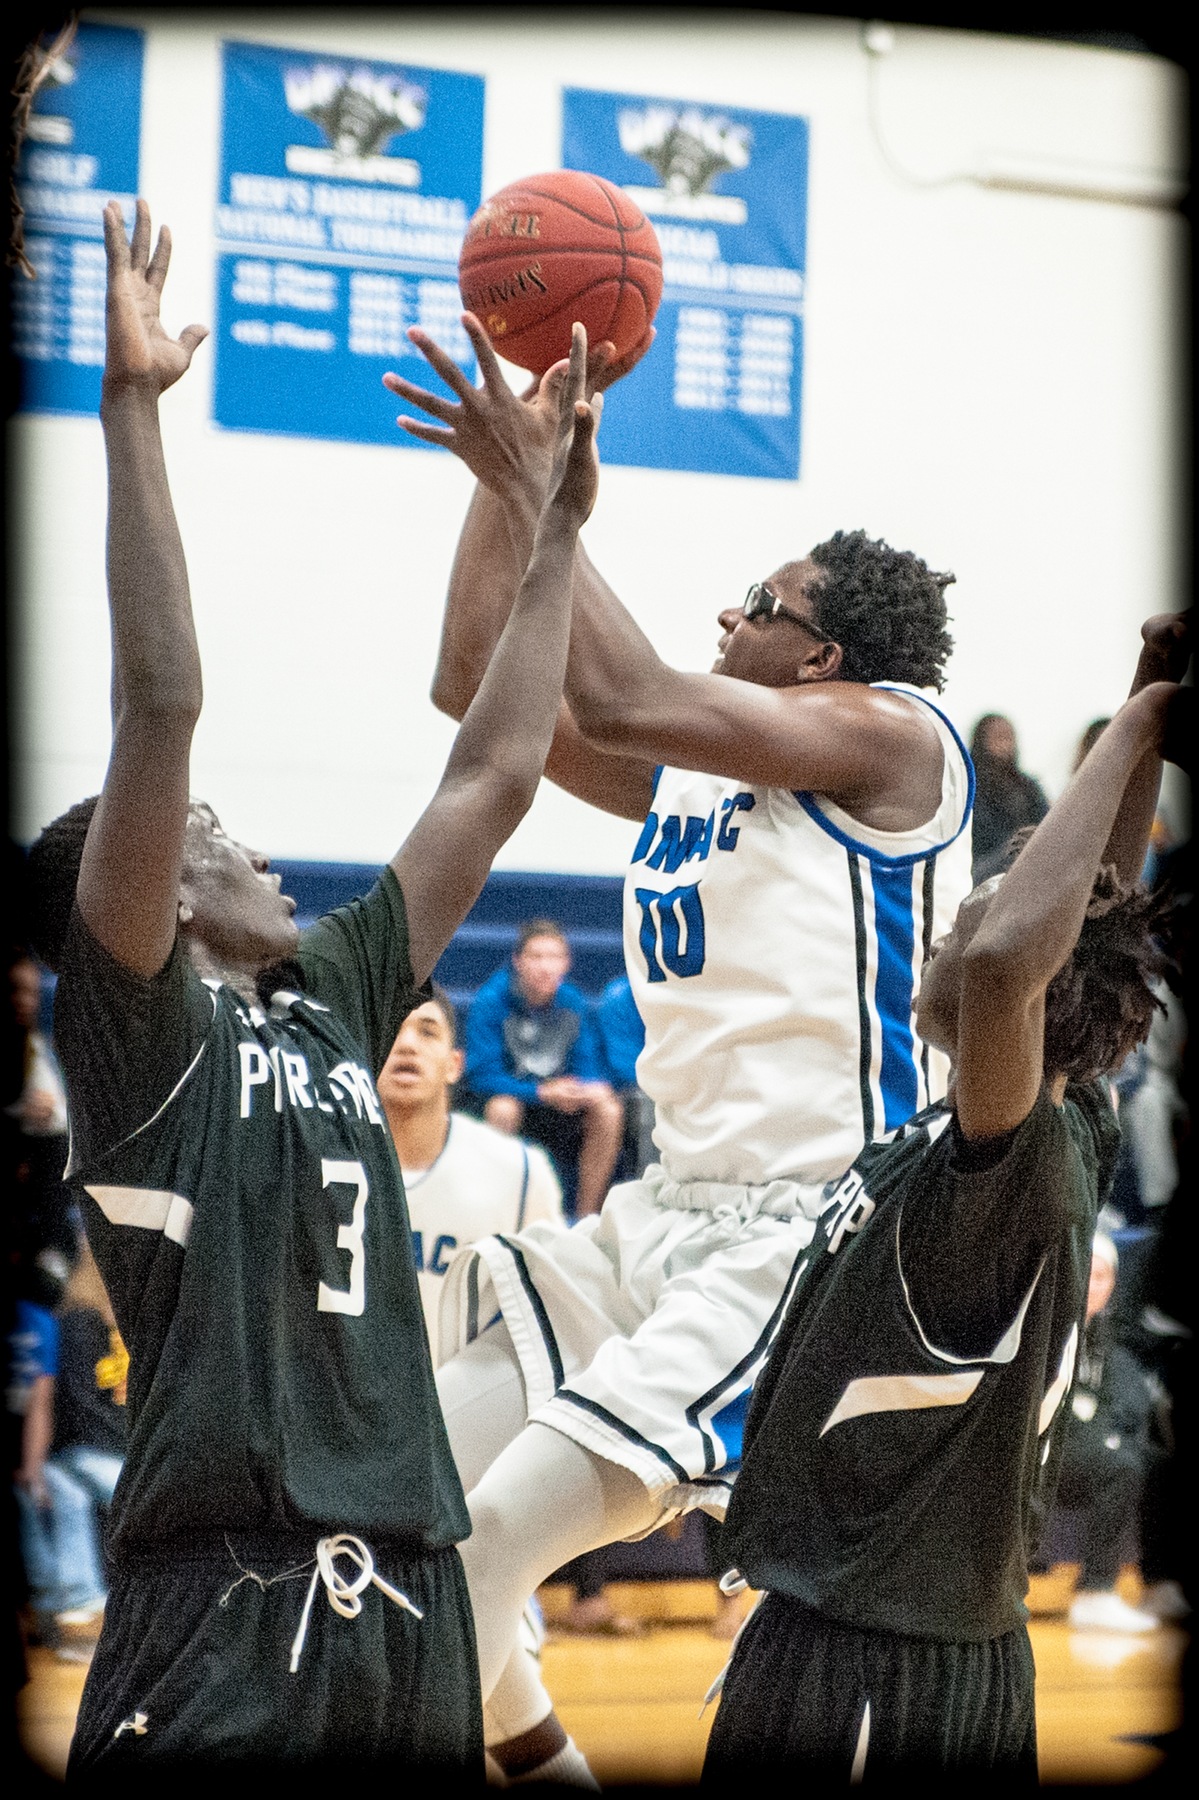 DMACC Men's Basketball Team Gets Wins in its First Two Games